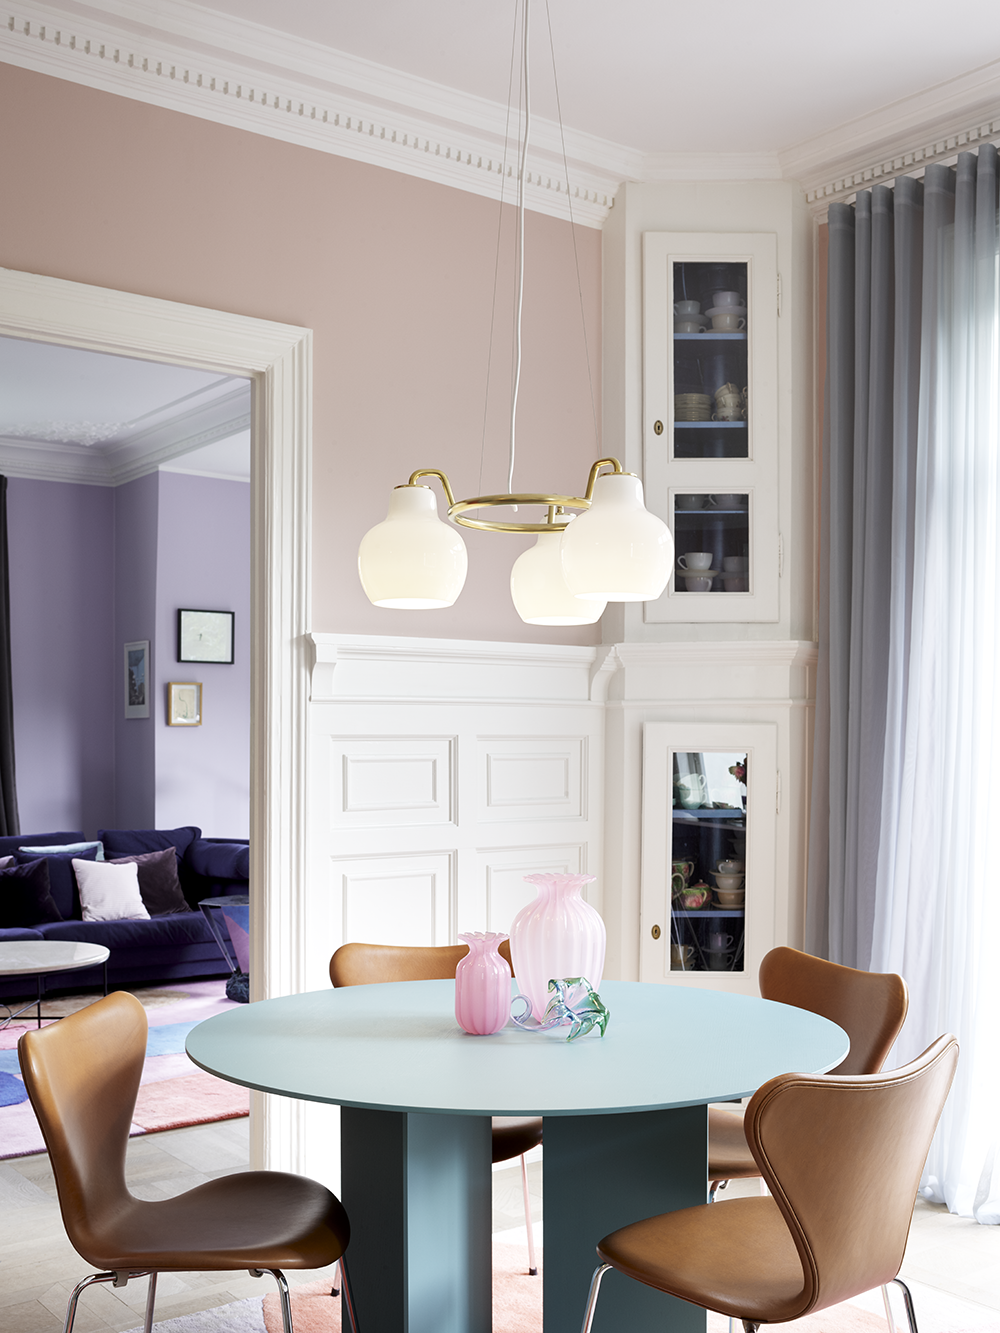 VL Ring Crown Chandelier by Louis Poulsen over a dining table in a Danish apartment.